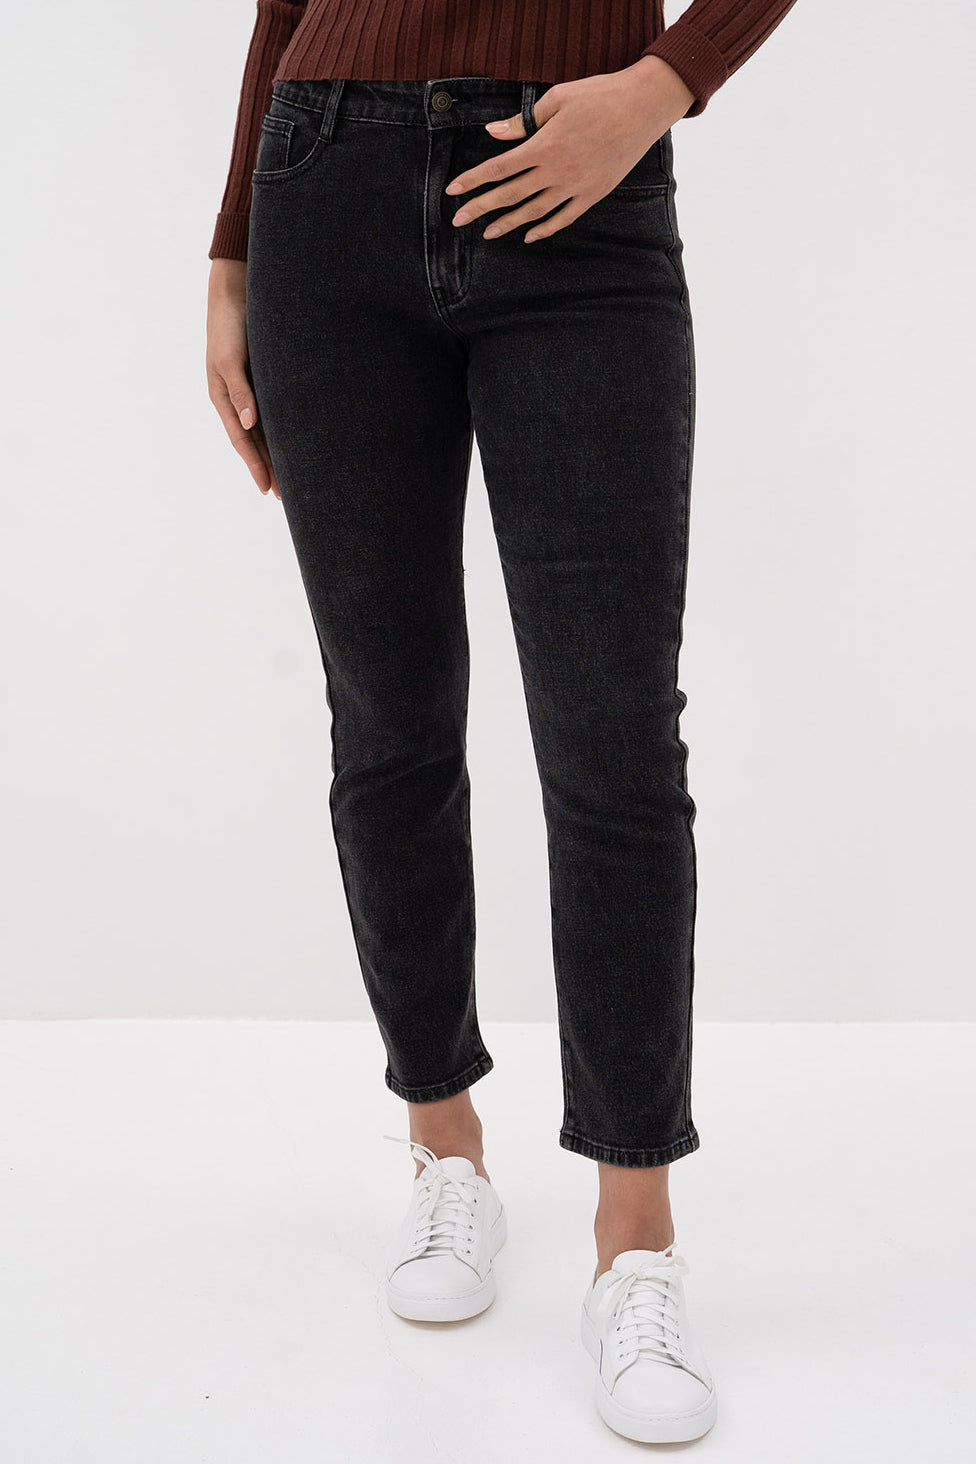 HUMIDITY FRANKIE JEAN  The Humidity Frankie Jeans are simple stylish slim-fitting, ankle-length jeans.  The Frankie Jeans are mid-rise jeans which sport an elasticated band at the back if the waistline, moving to four classic pockets, finished at a cropped ankle length.